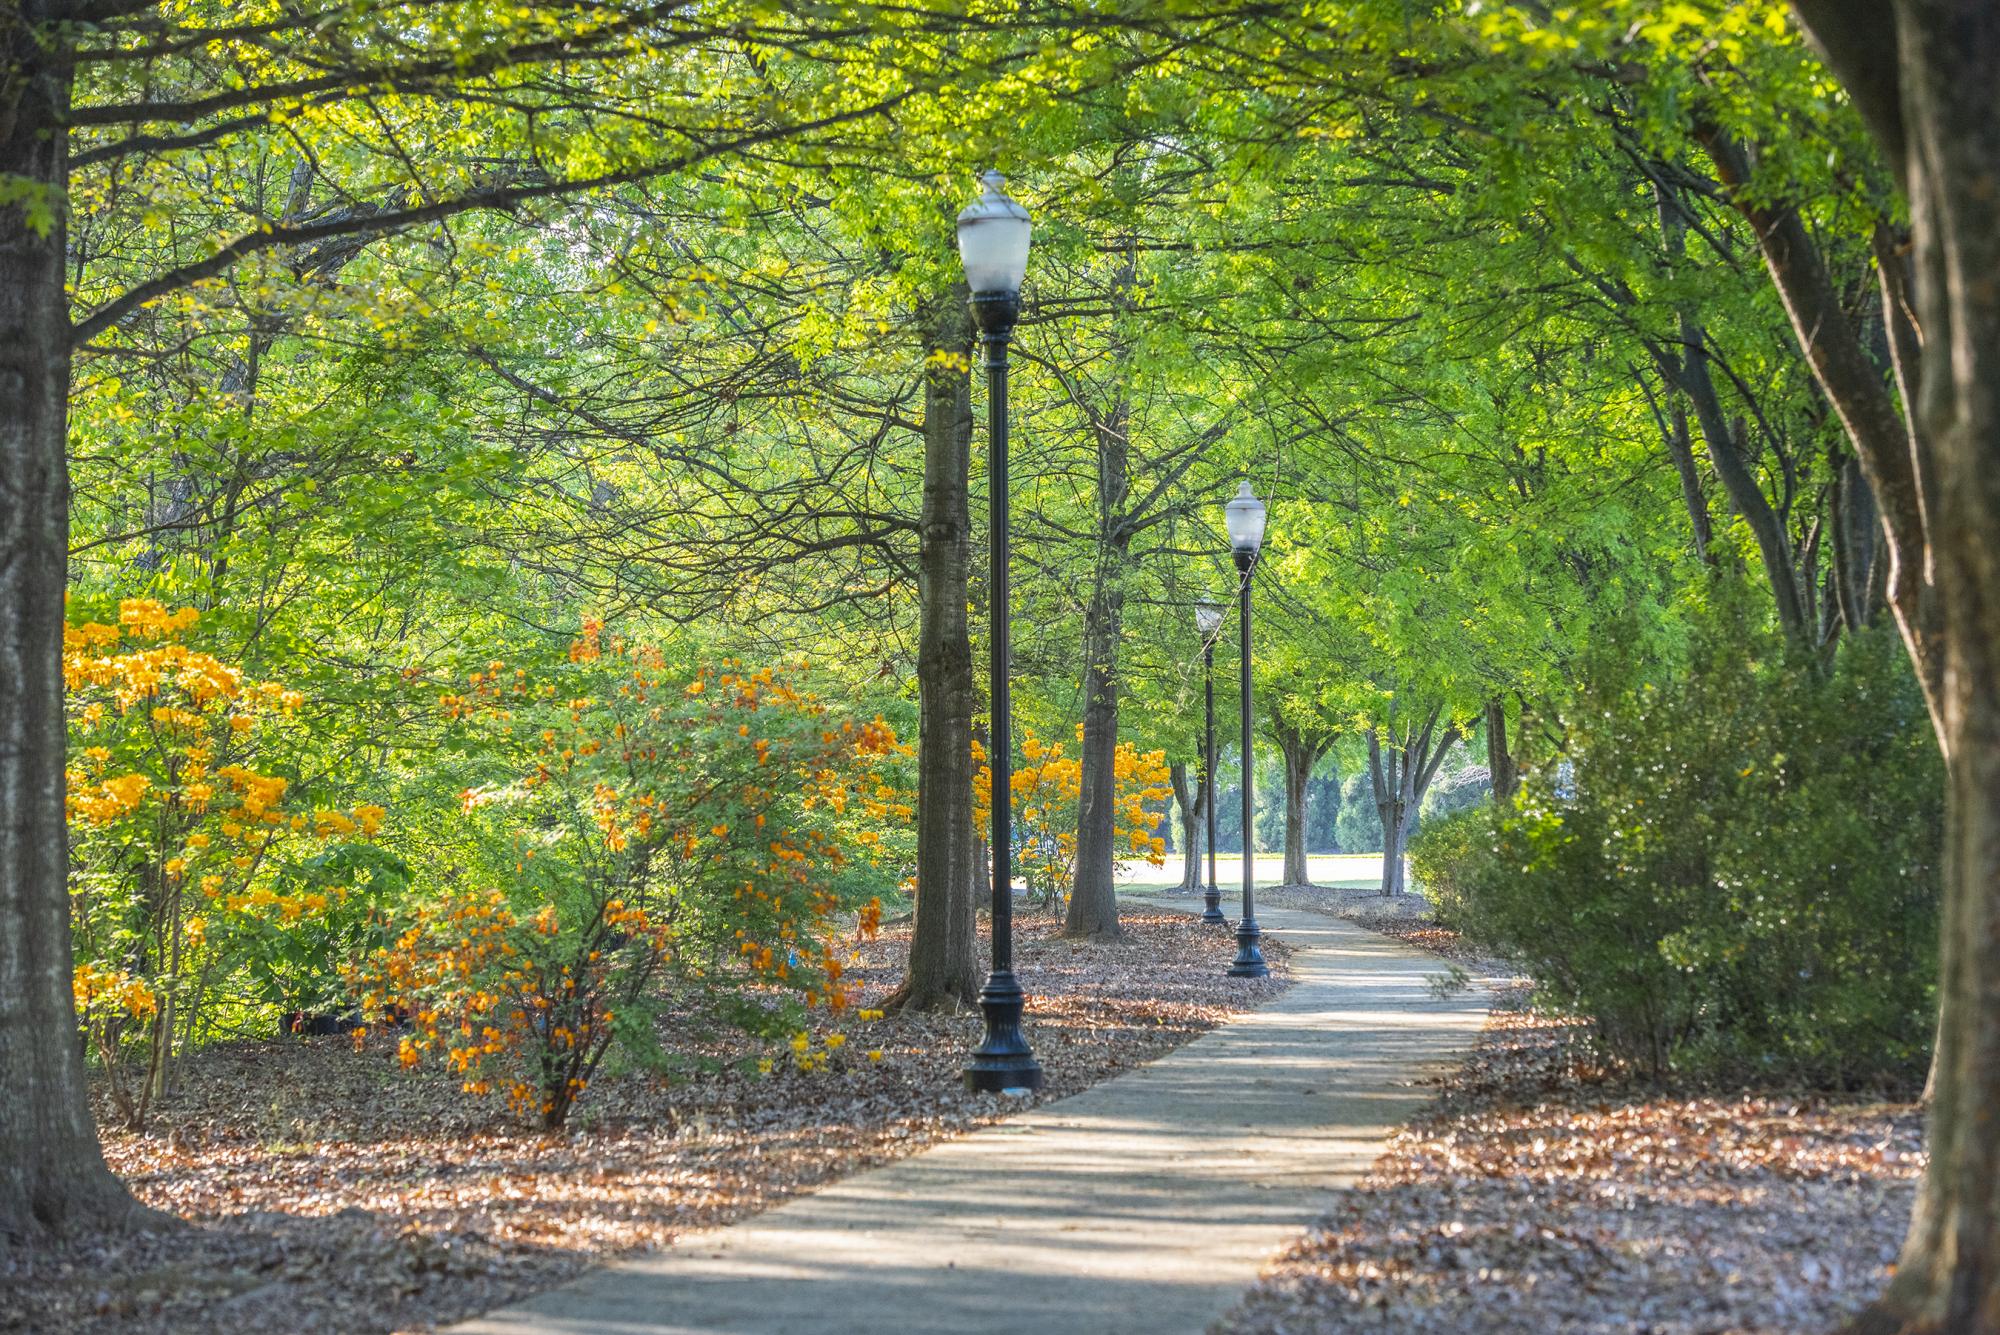 The City of Clemson has had a public tree ordinance for decades  and is home to more than 300 acres of  green space, including Gateway Park.  Photo: Ken Scar.